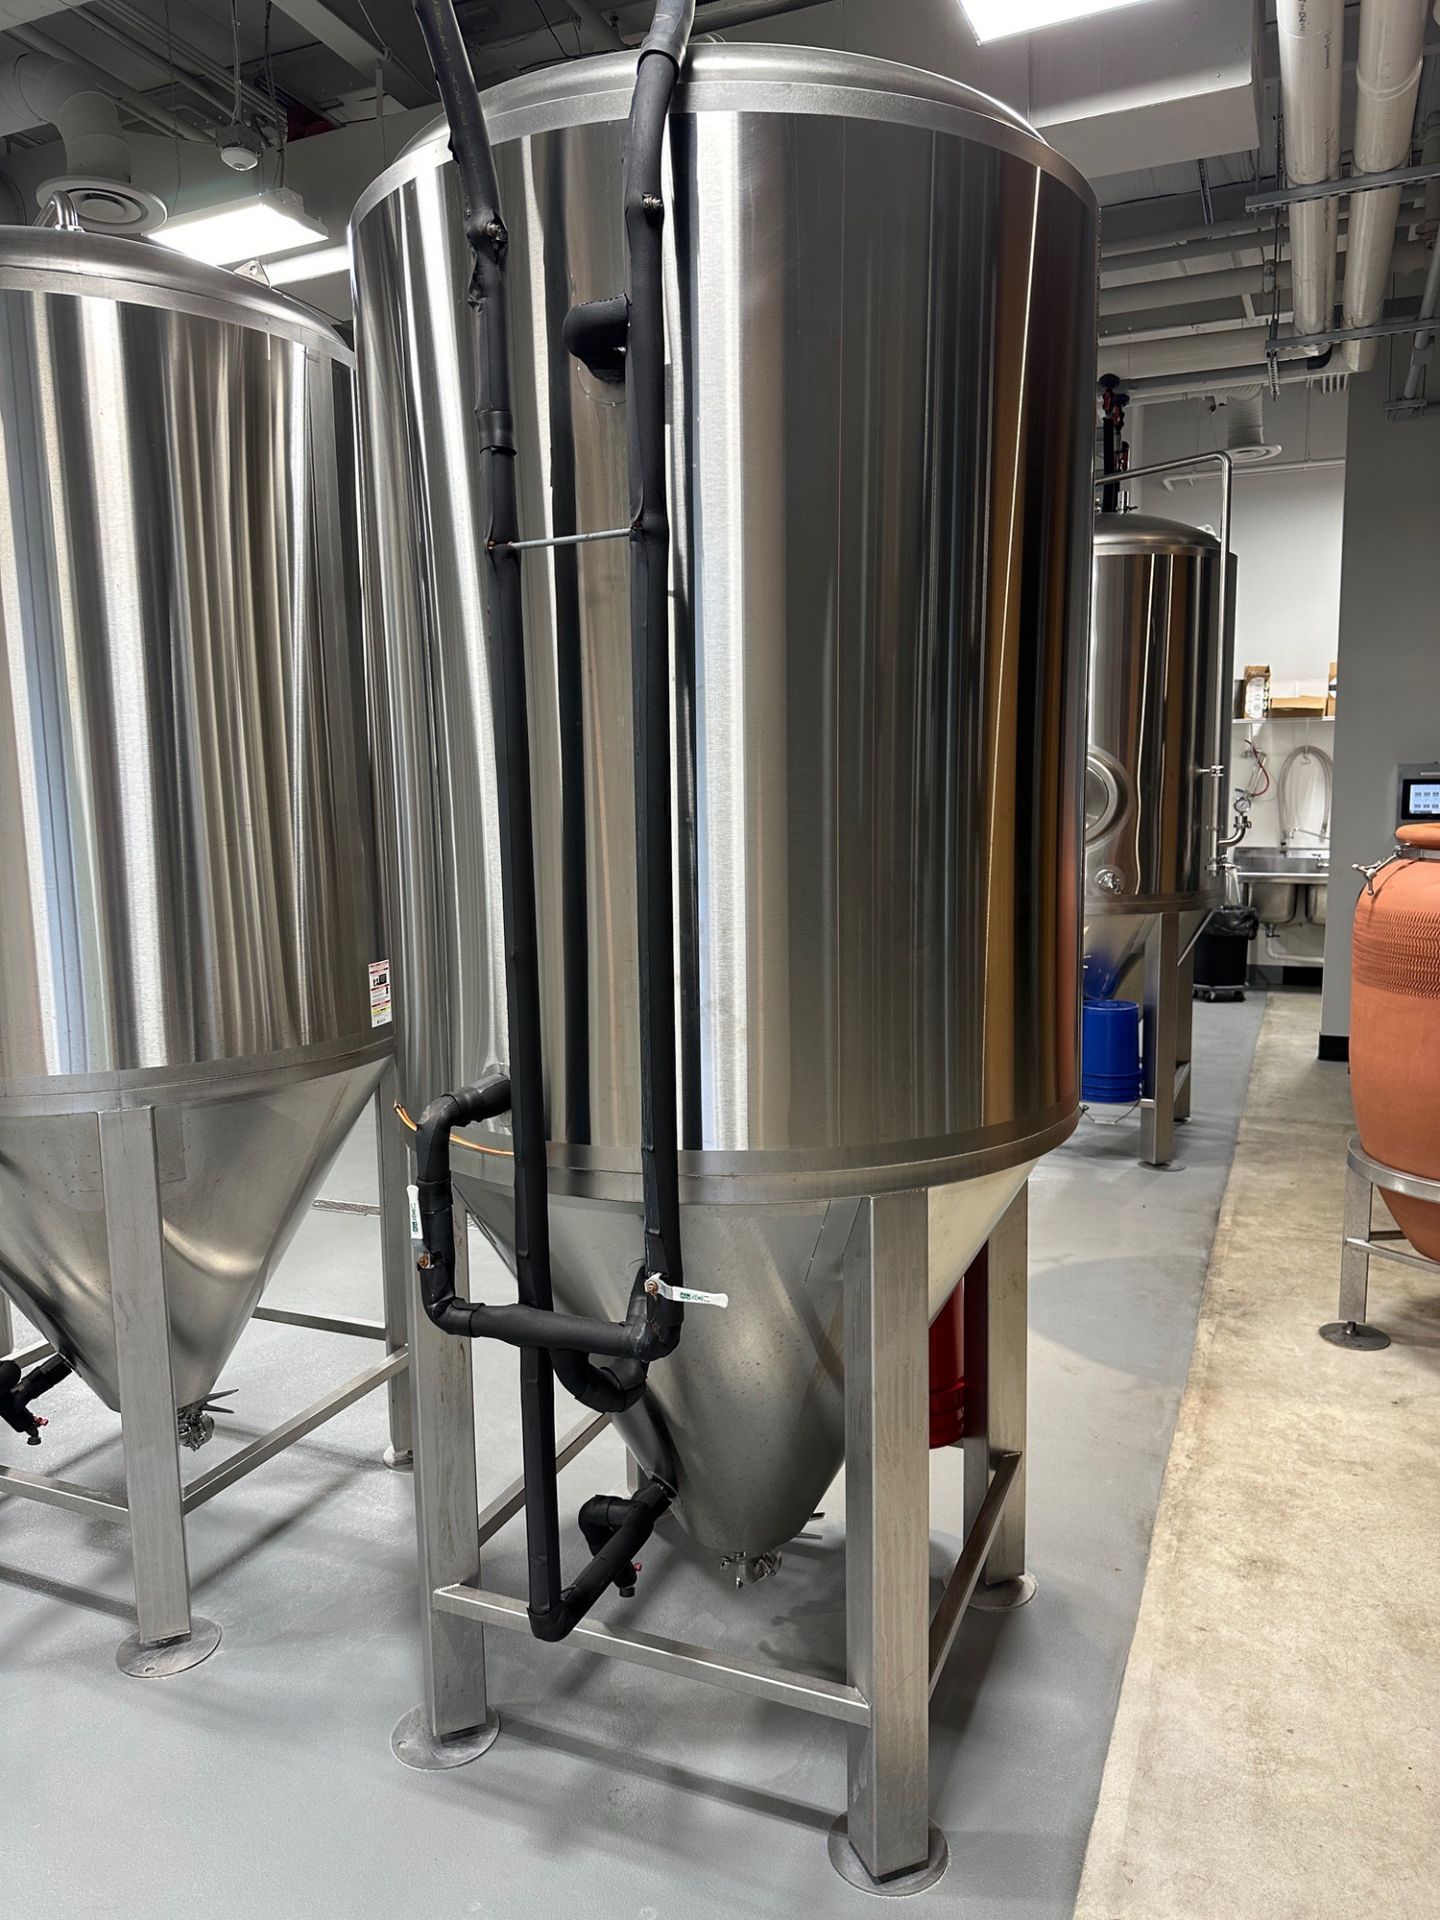 Portland Kettle Works 15 BBL Fermentation Tank - Cone Bottom, Glycol Jacketed, Mandoor, Zwickle - Image 2 of 3